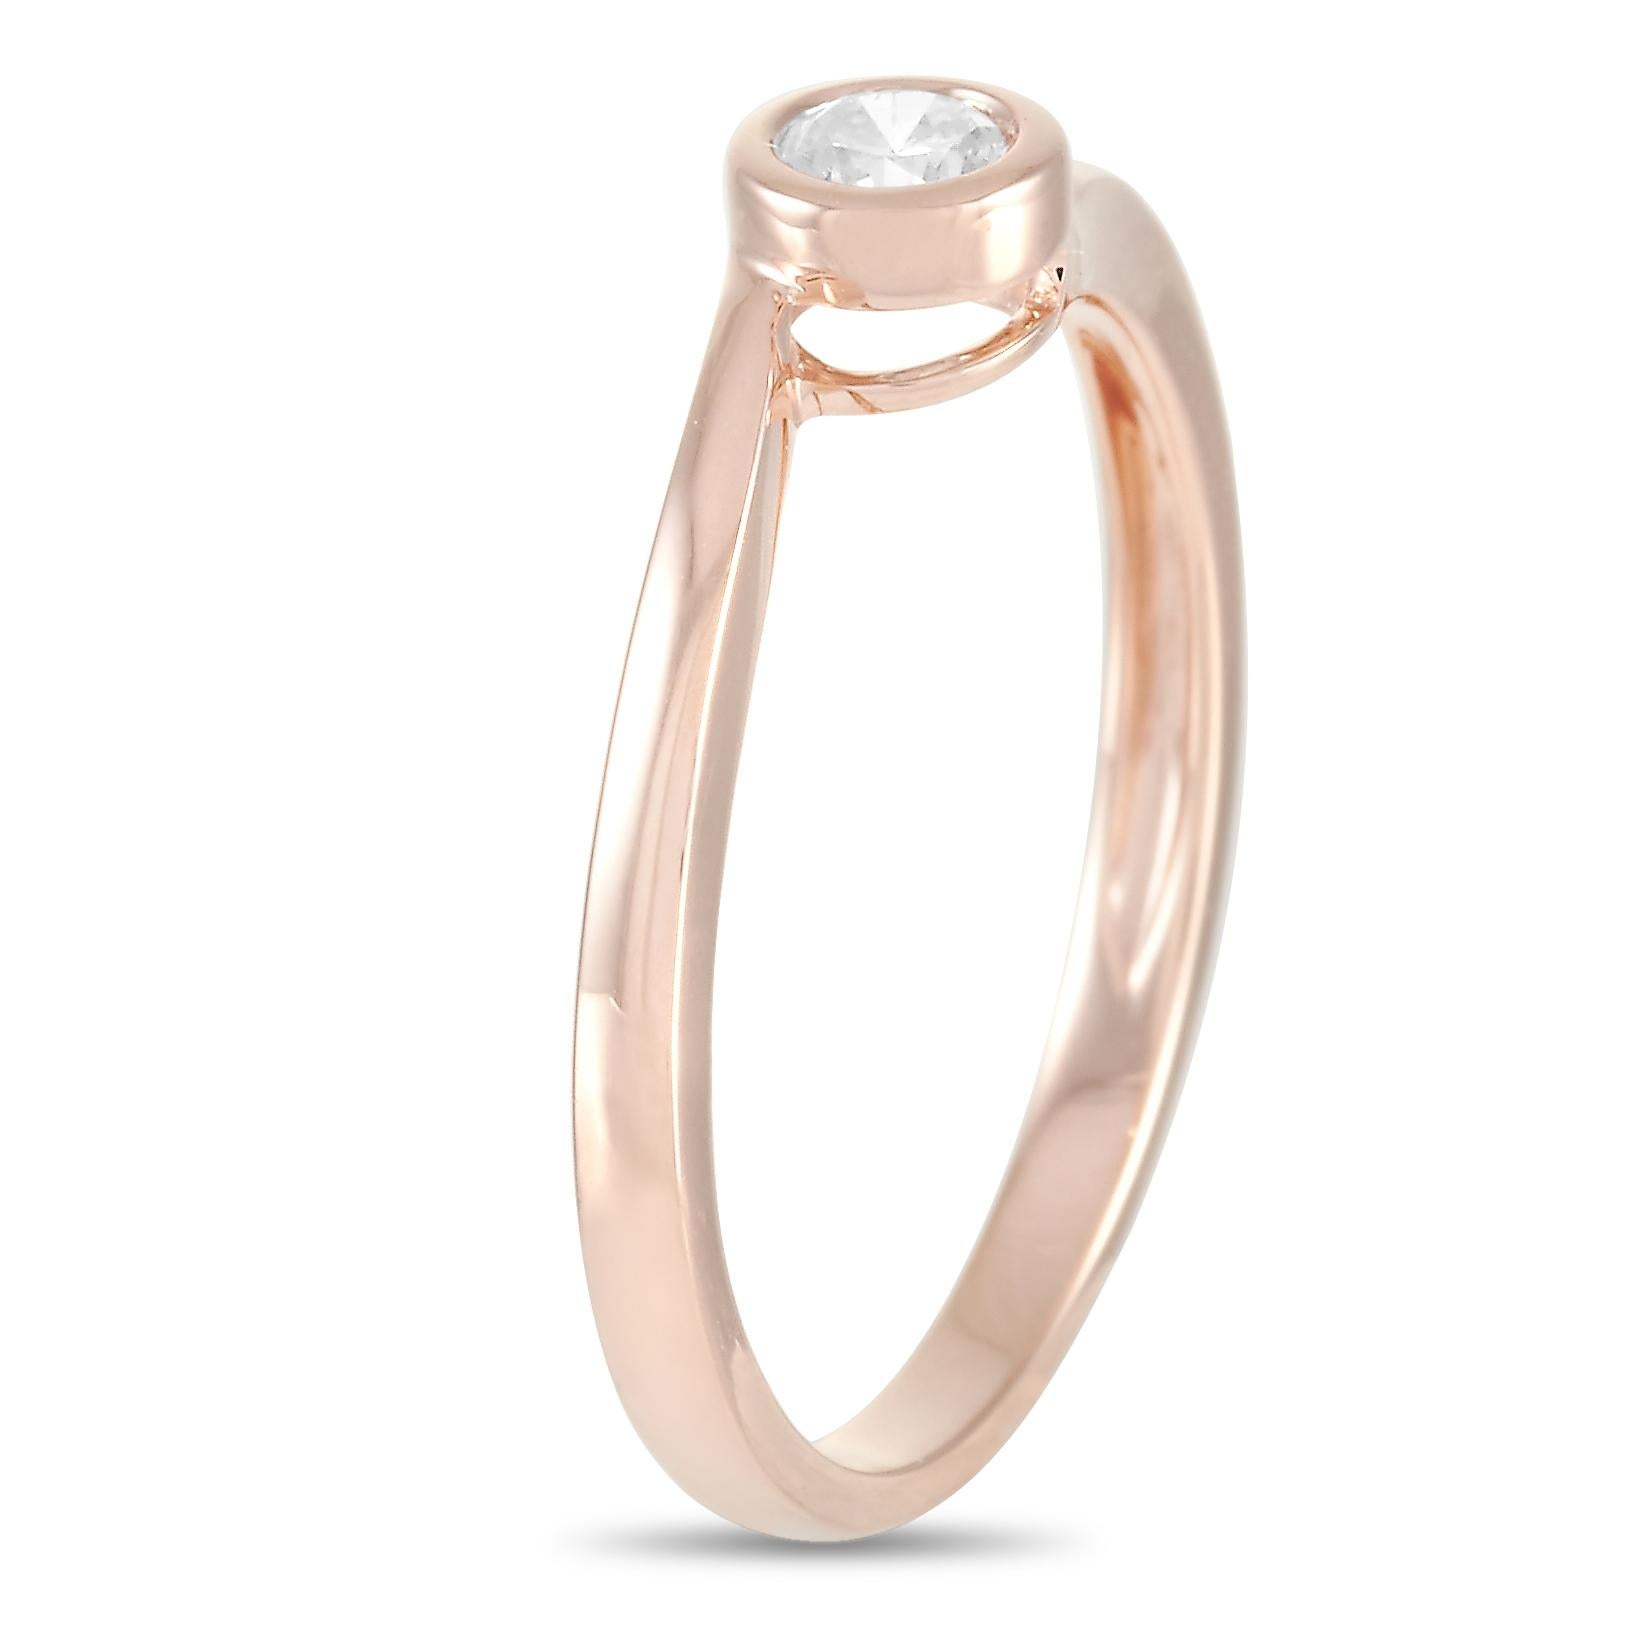 This LB Exclusive ring is made of 14K rose gold and embellished with a 0.22 ct diamond stone. The ring weighs 1.7 grams and boasts band thickness of 2 mm and top height of 4 mm, while top dimensions measure 5 by 5 mm.
 
 Offered in brand new